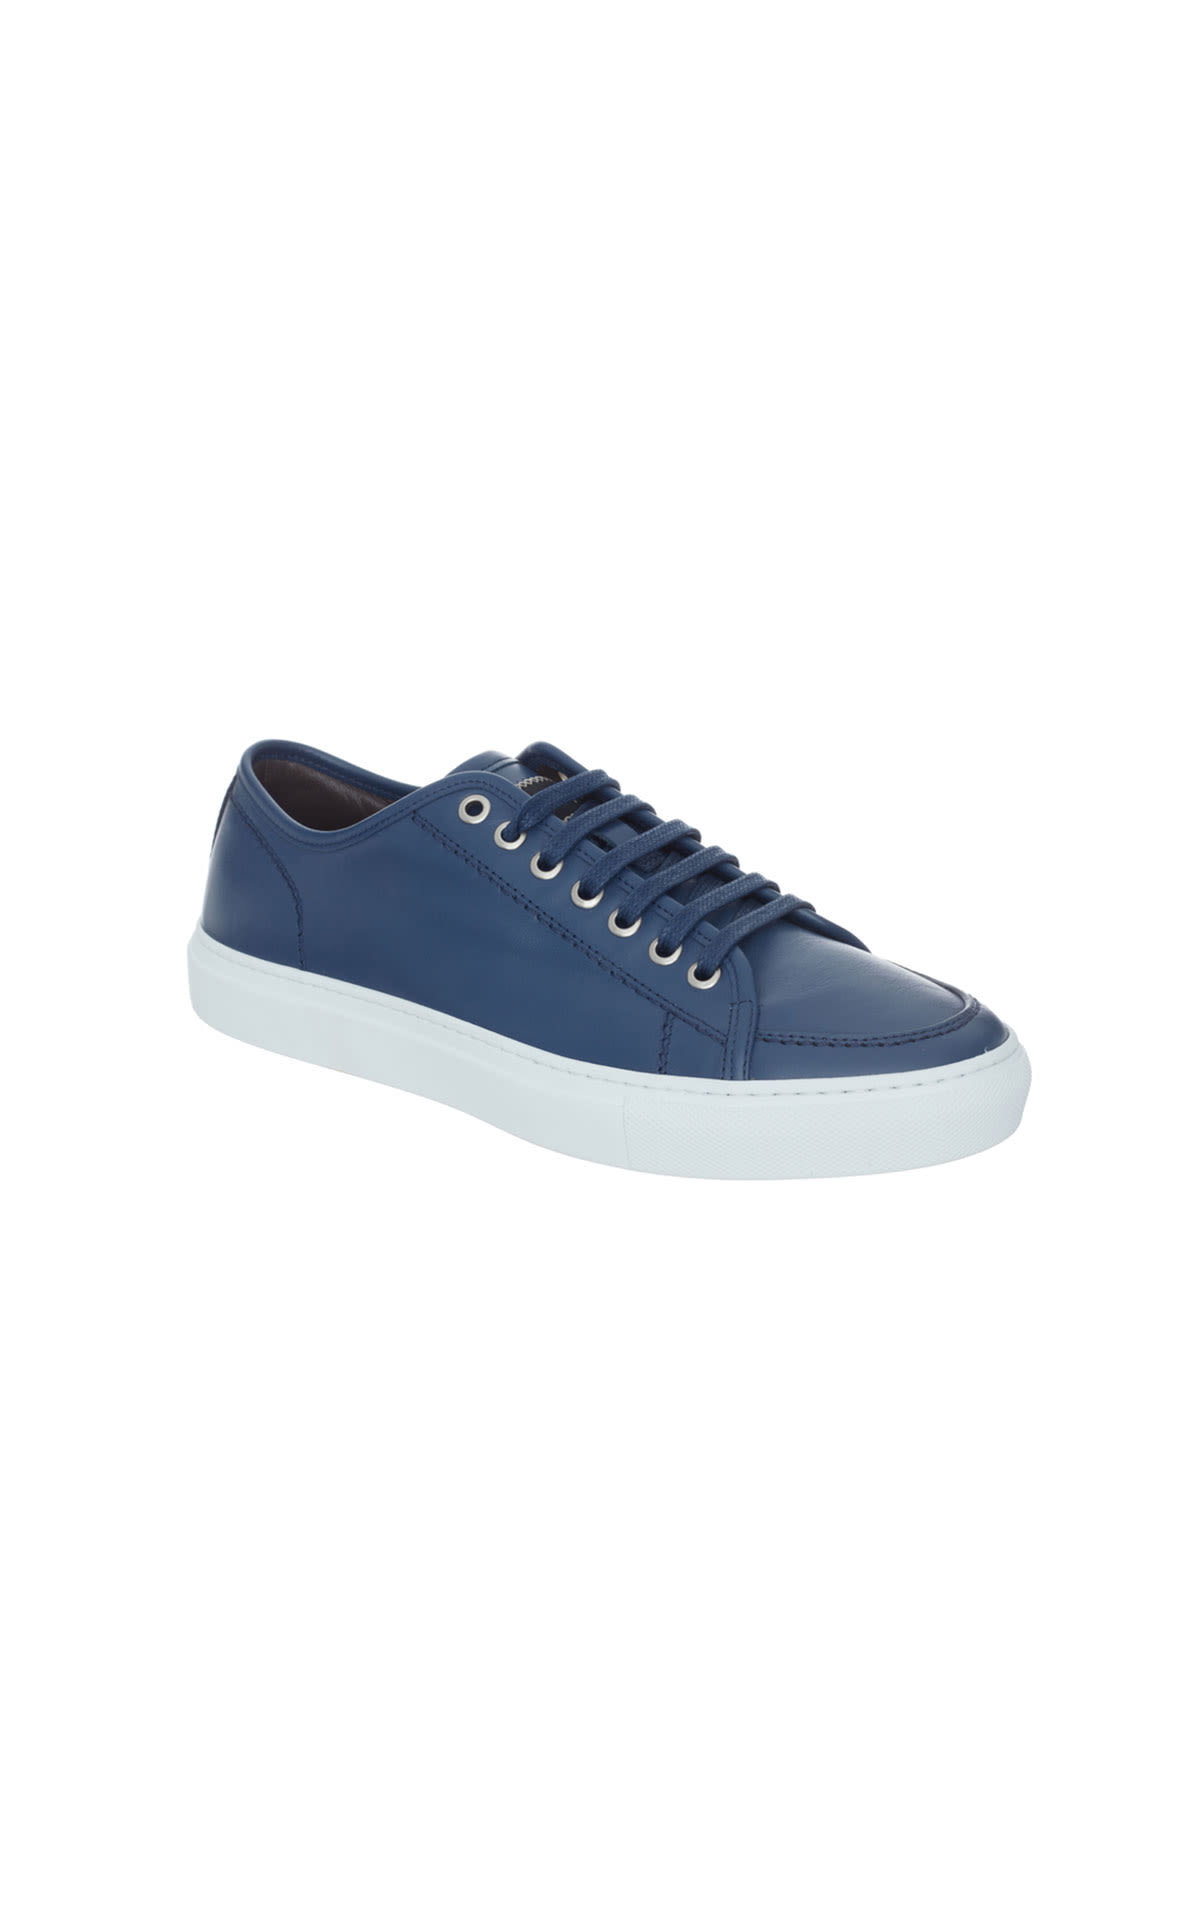 Brioni Classic blue sneaker from Bicester Village